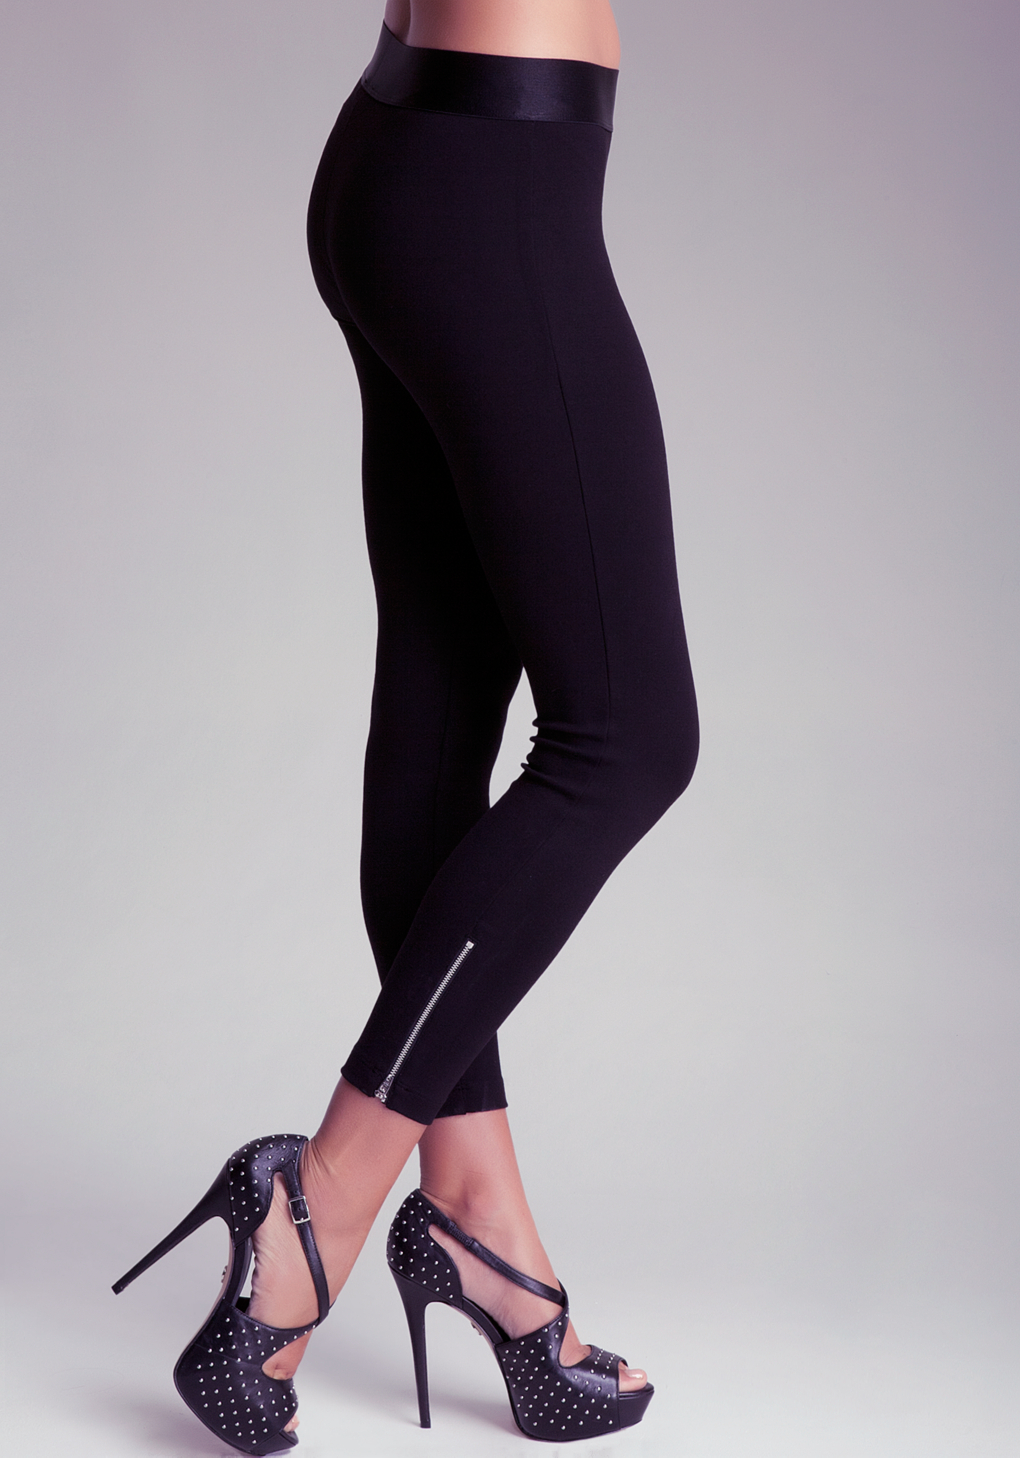 womens leggings with zipper ankles